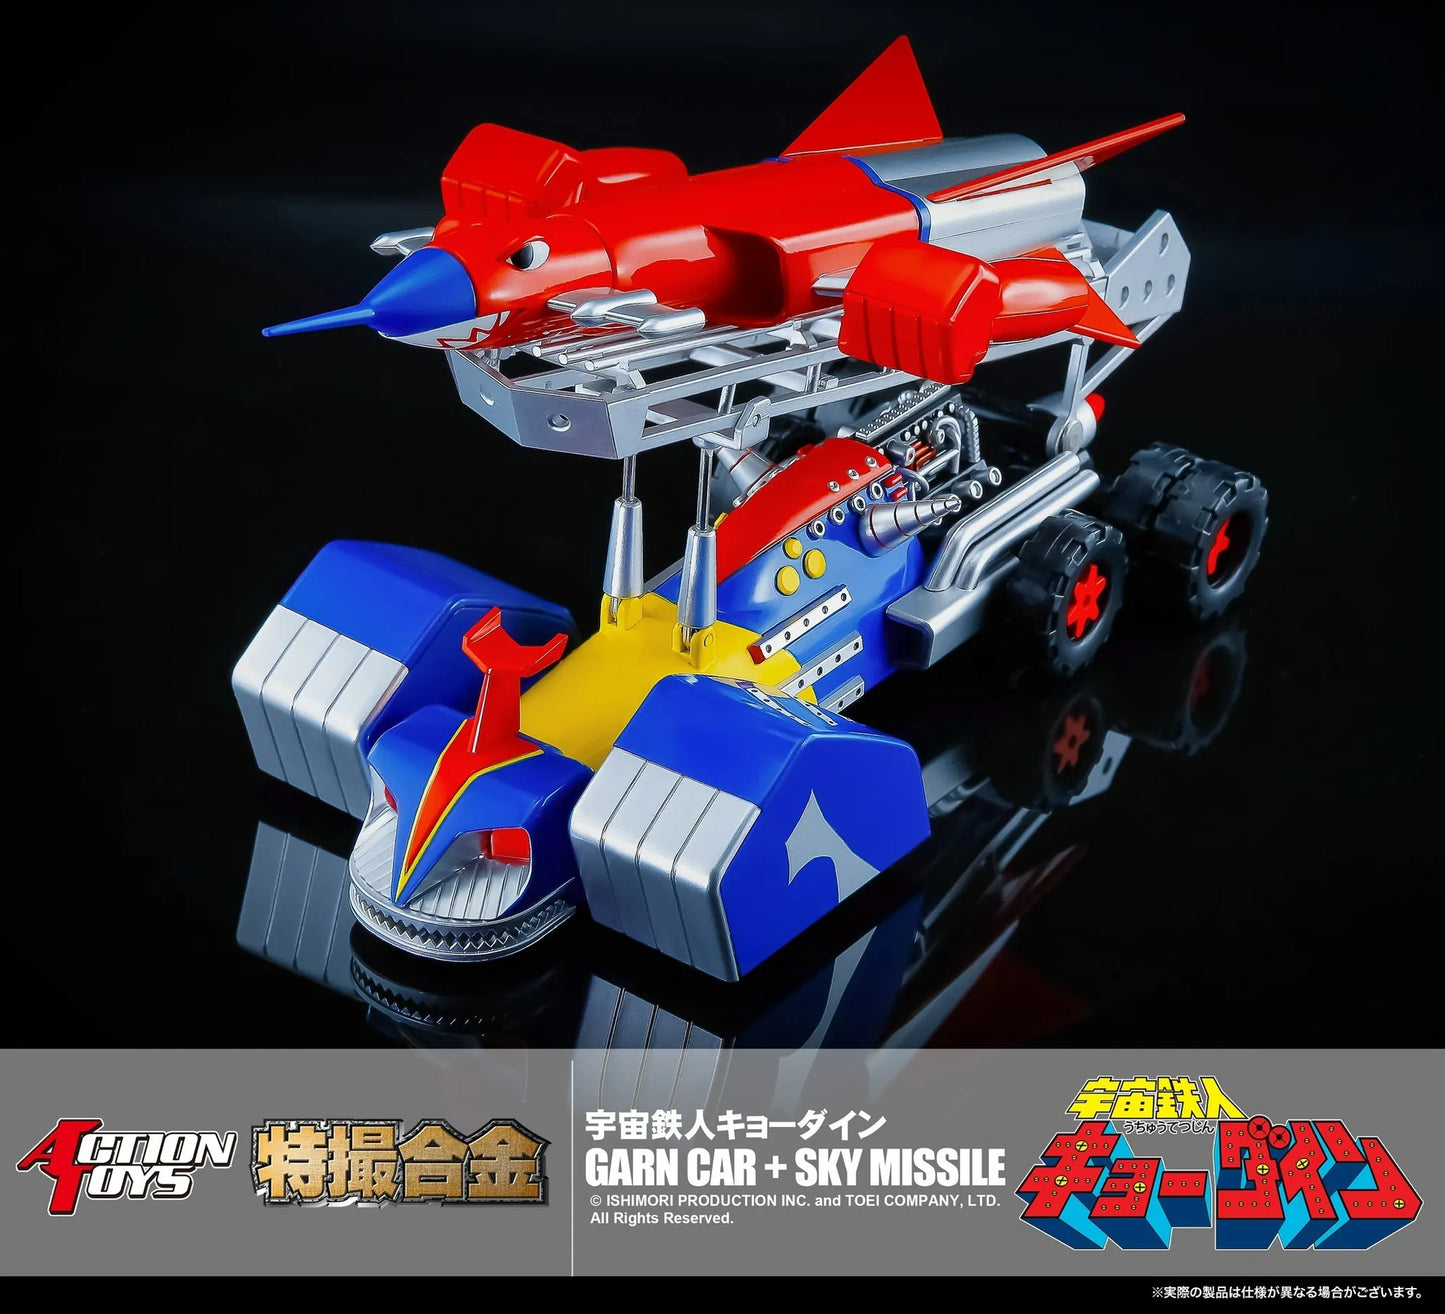 [PRE-ORDER] Action Toys <Space Ironman Kyodain> GARN CAR + SKY MISSILE #AT-TD04